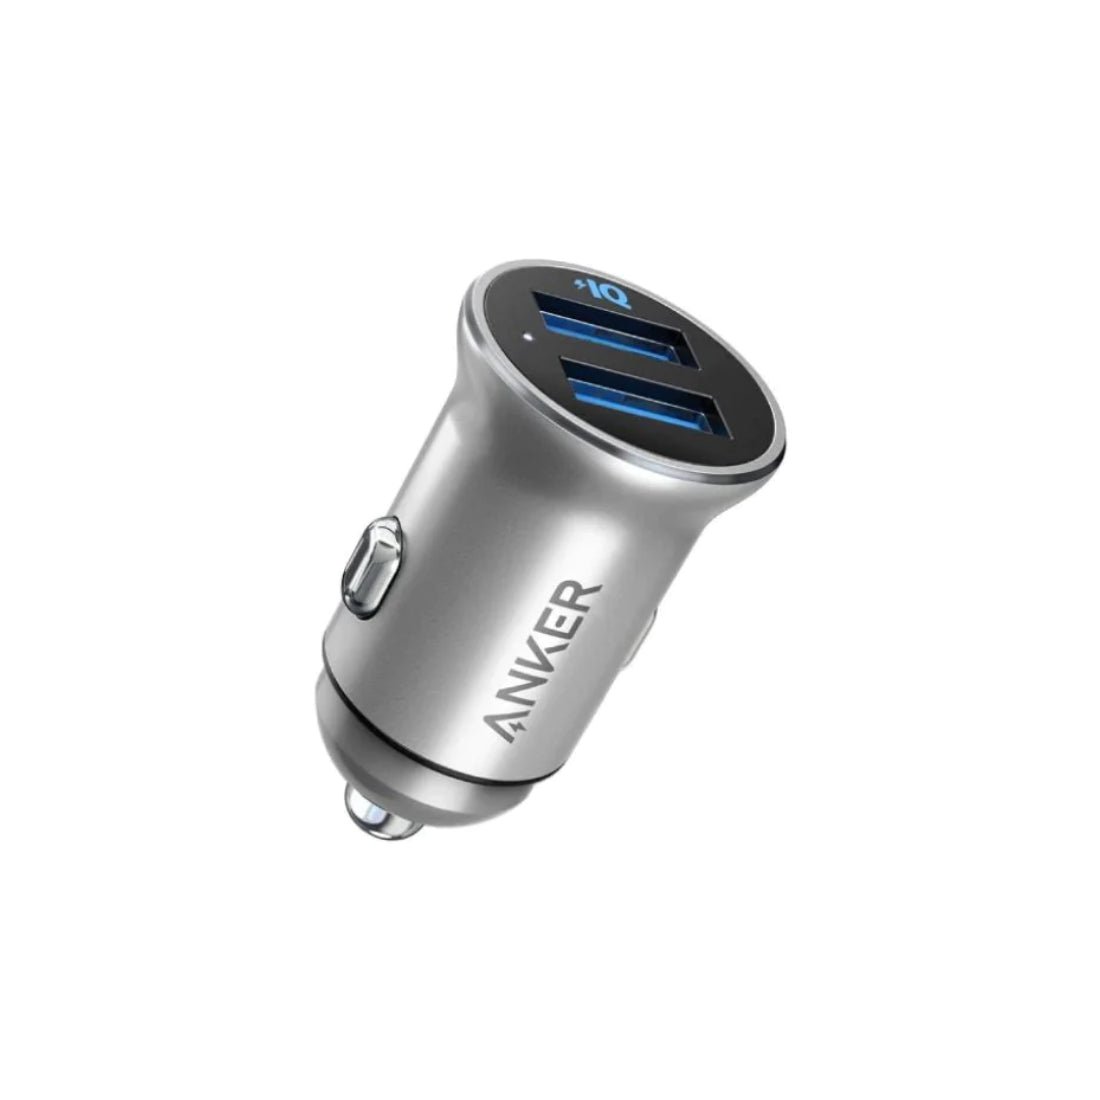 Anker PowerDrive 2 Alloy Metal Mini Car Charger - Silver - شاحن - Store 974 | ستور ٩٧٤